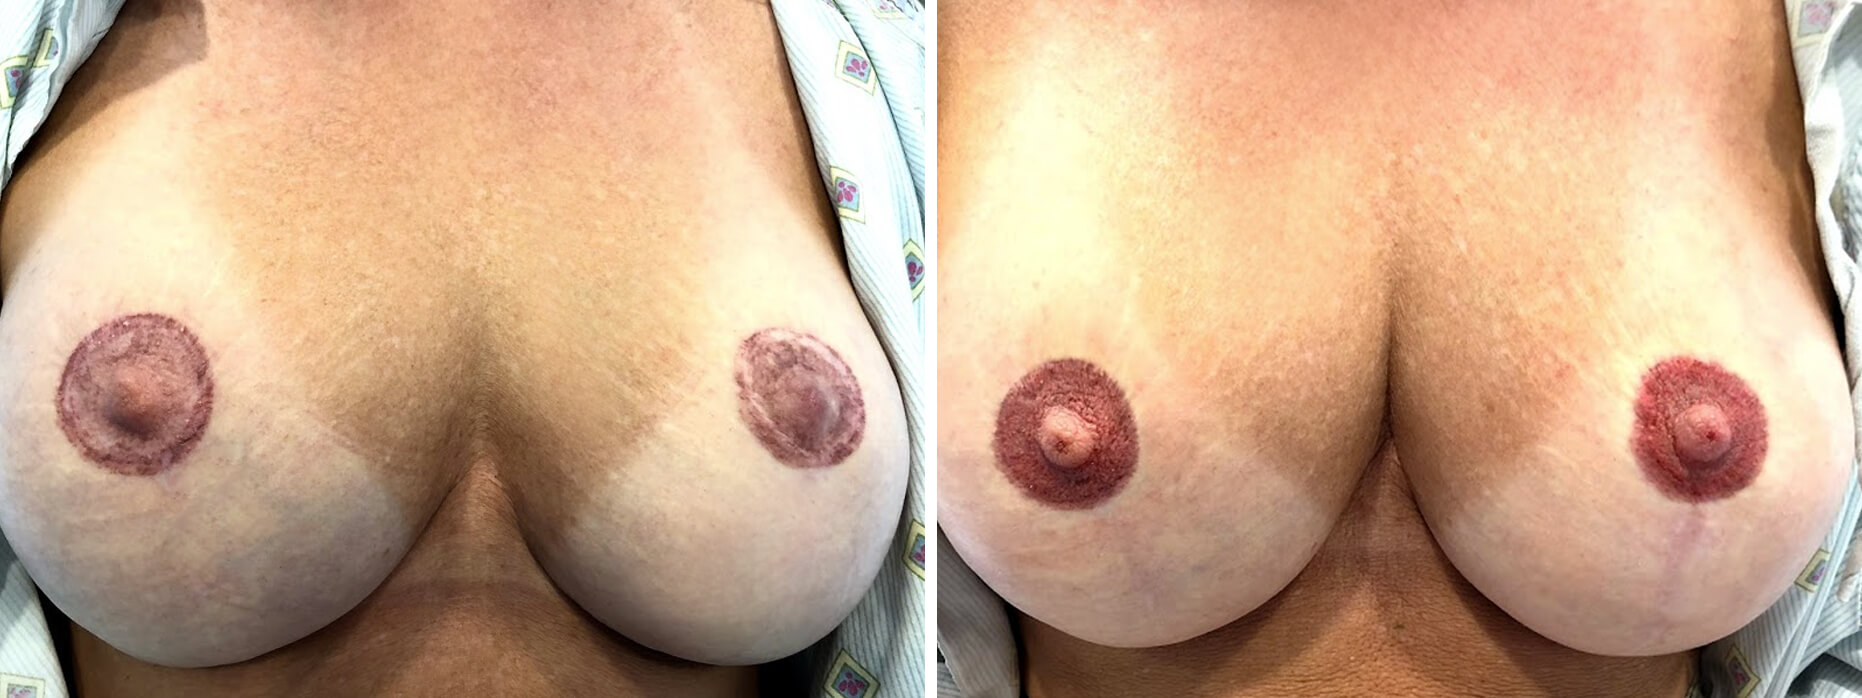 Areola Pigmentation Restoration - Before and After